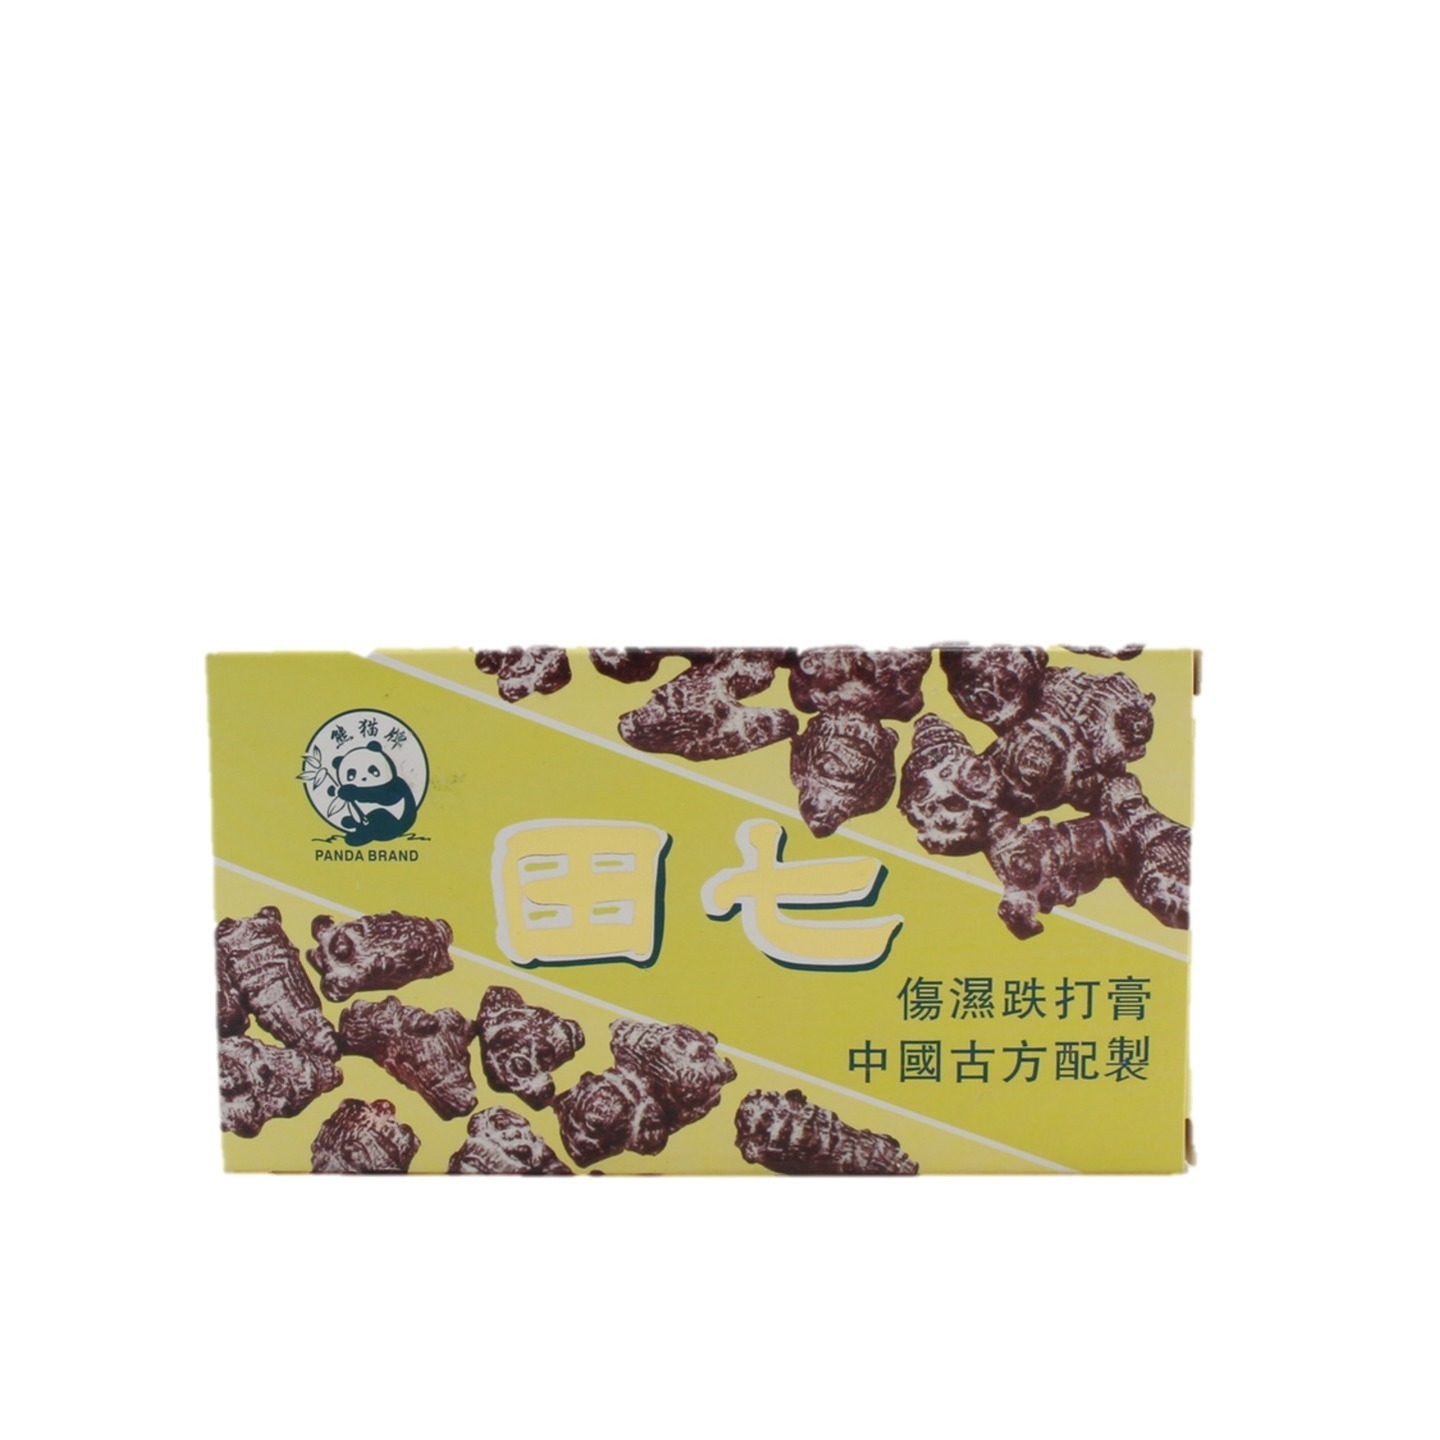 Tian Chee Rheumatism Plaster S PROMOTION FOR 12